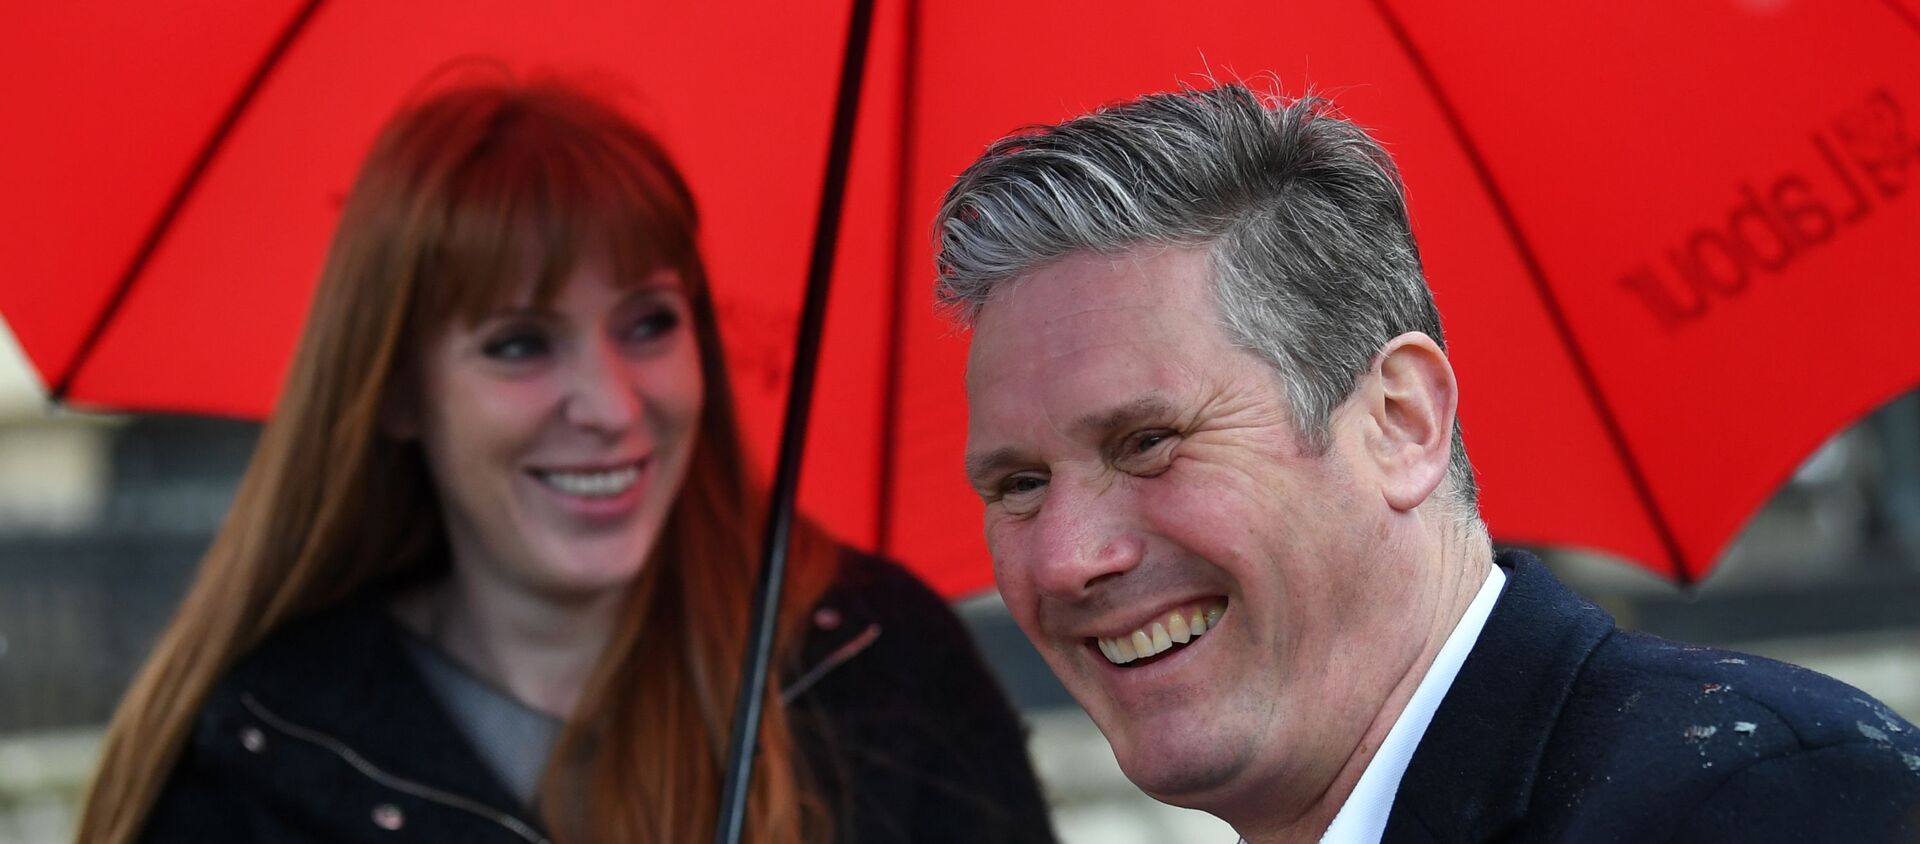 Labour Party leader Keir Starmer campaigns ahead of local elections, in Birmingham - Sputnik International, 1920, 12.05.2021